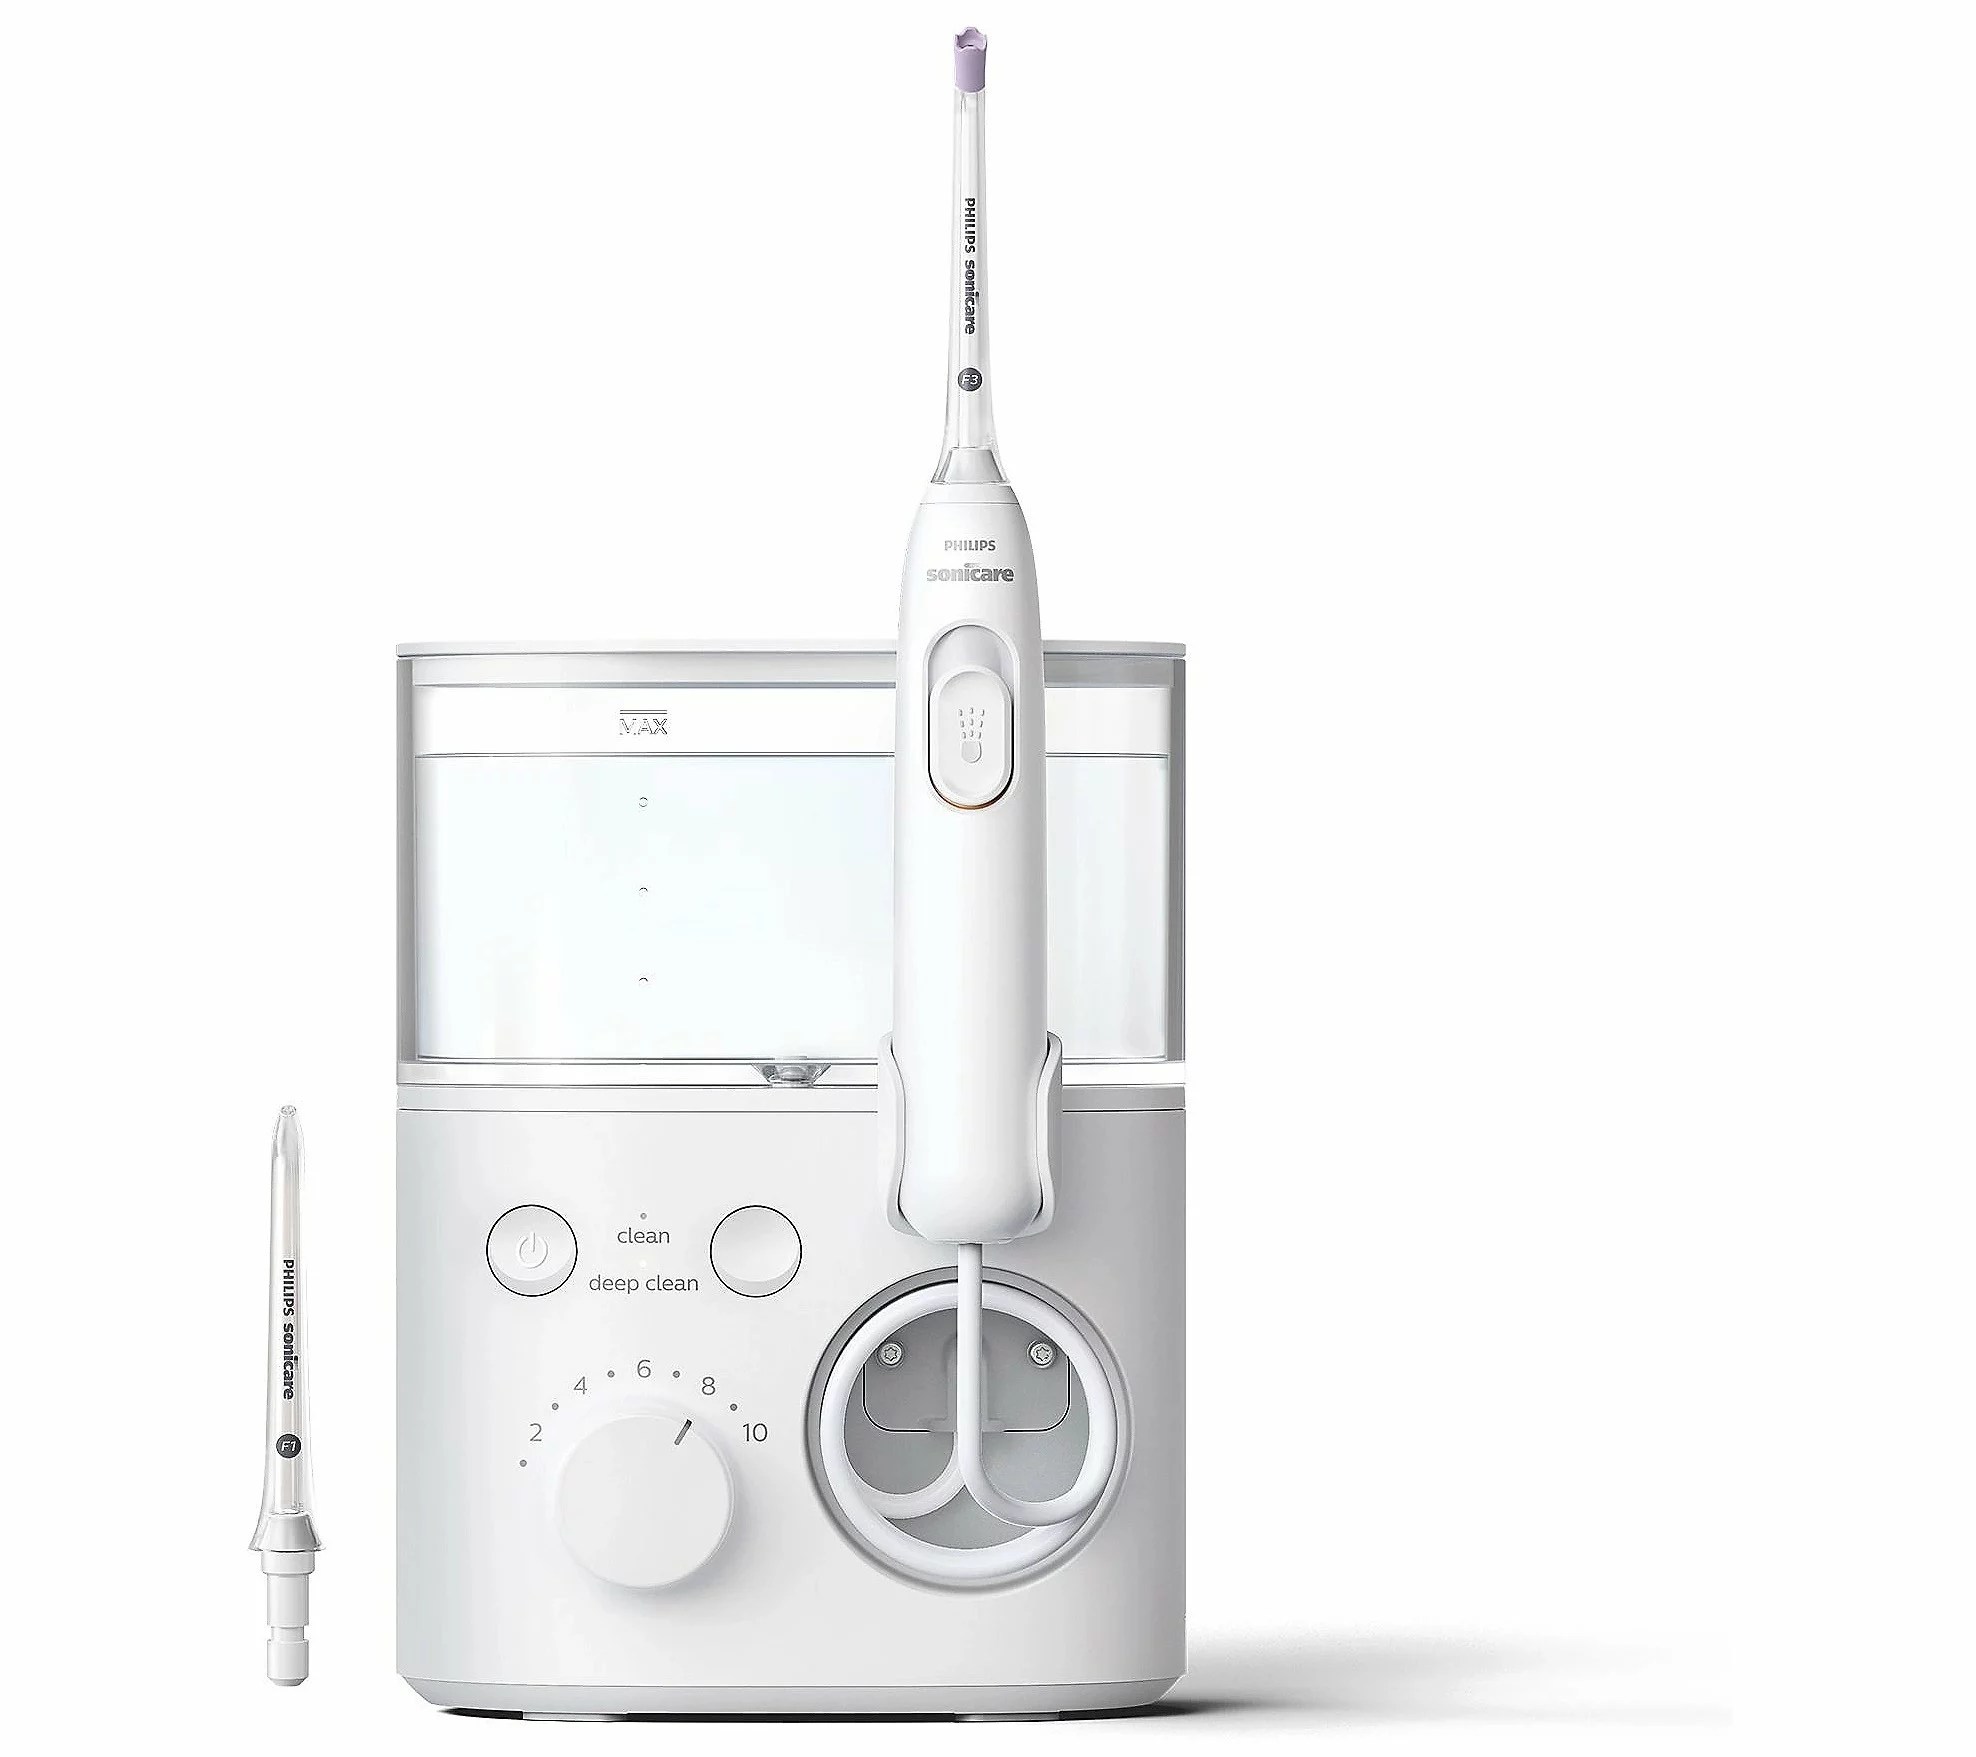 The Philips Sonicare Power Flosser 3000 with a second nozzle attachment